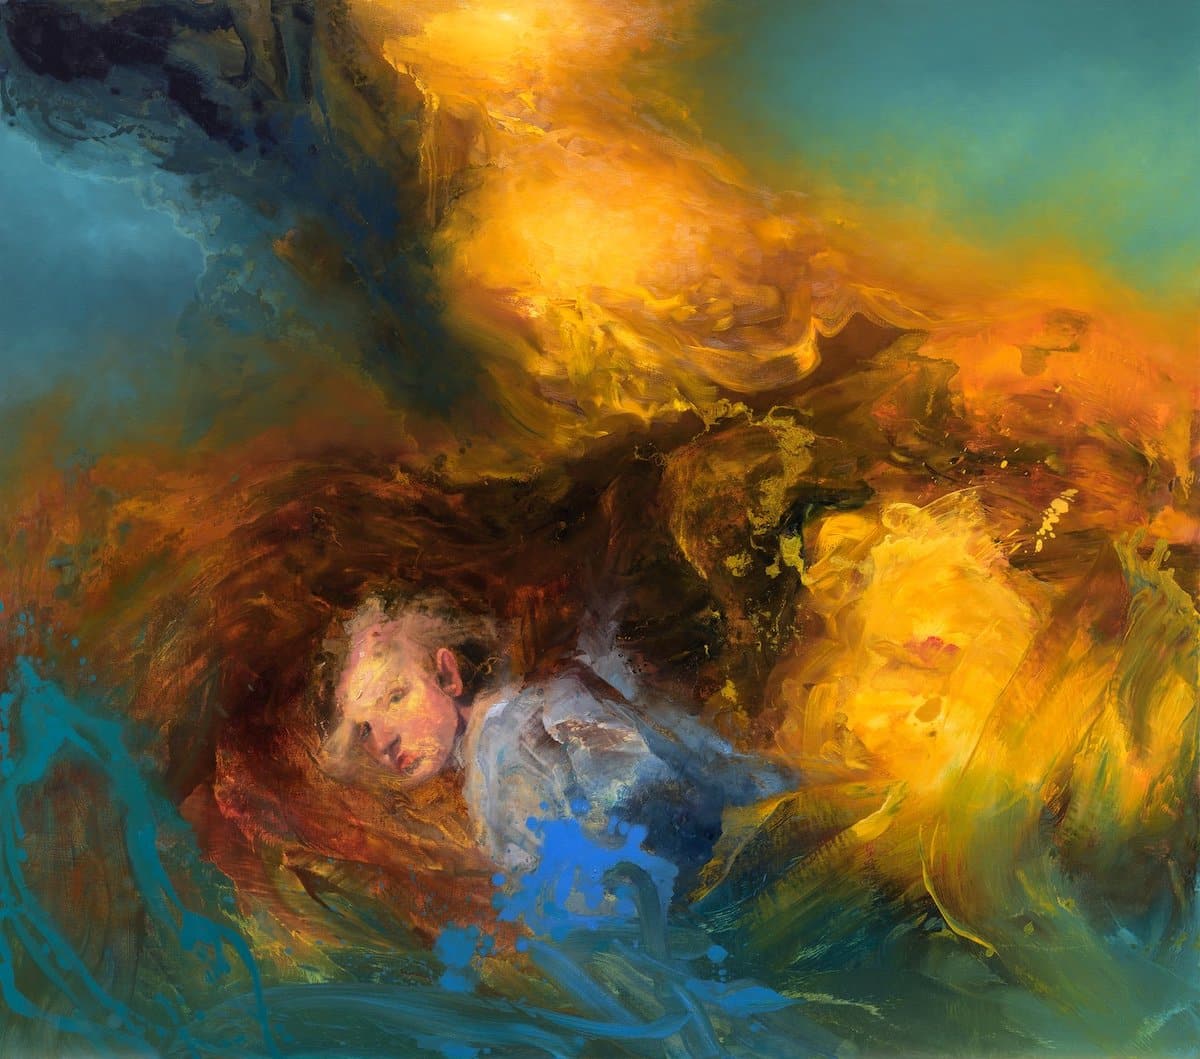 Abstract Oil Landscape Paintings by Samantha Keely Smith